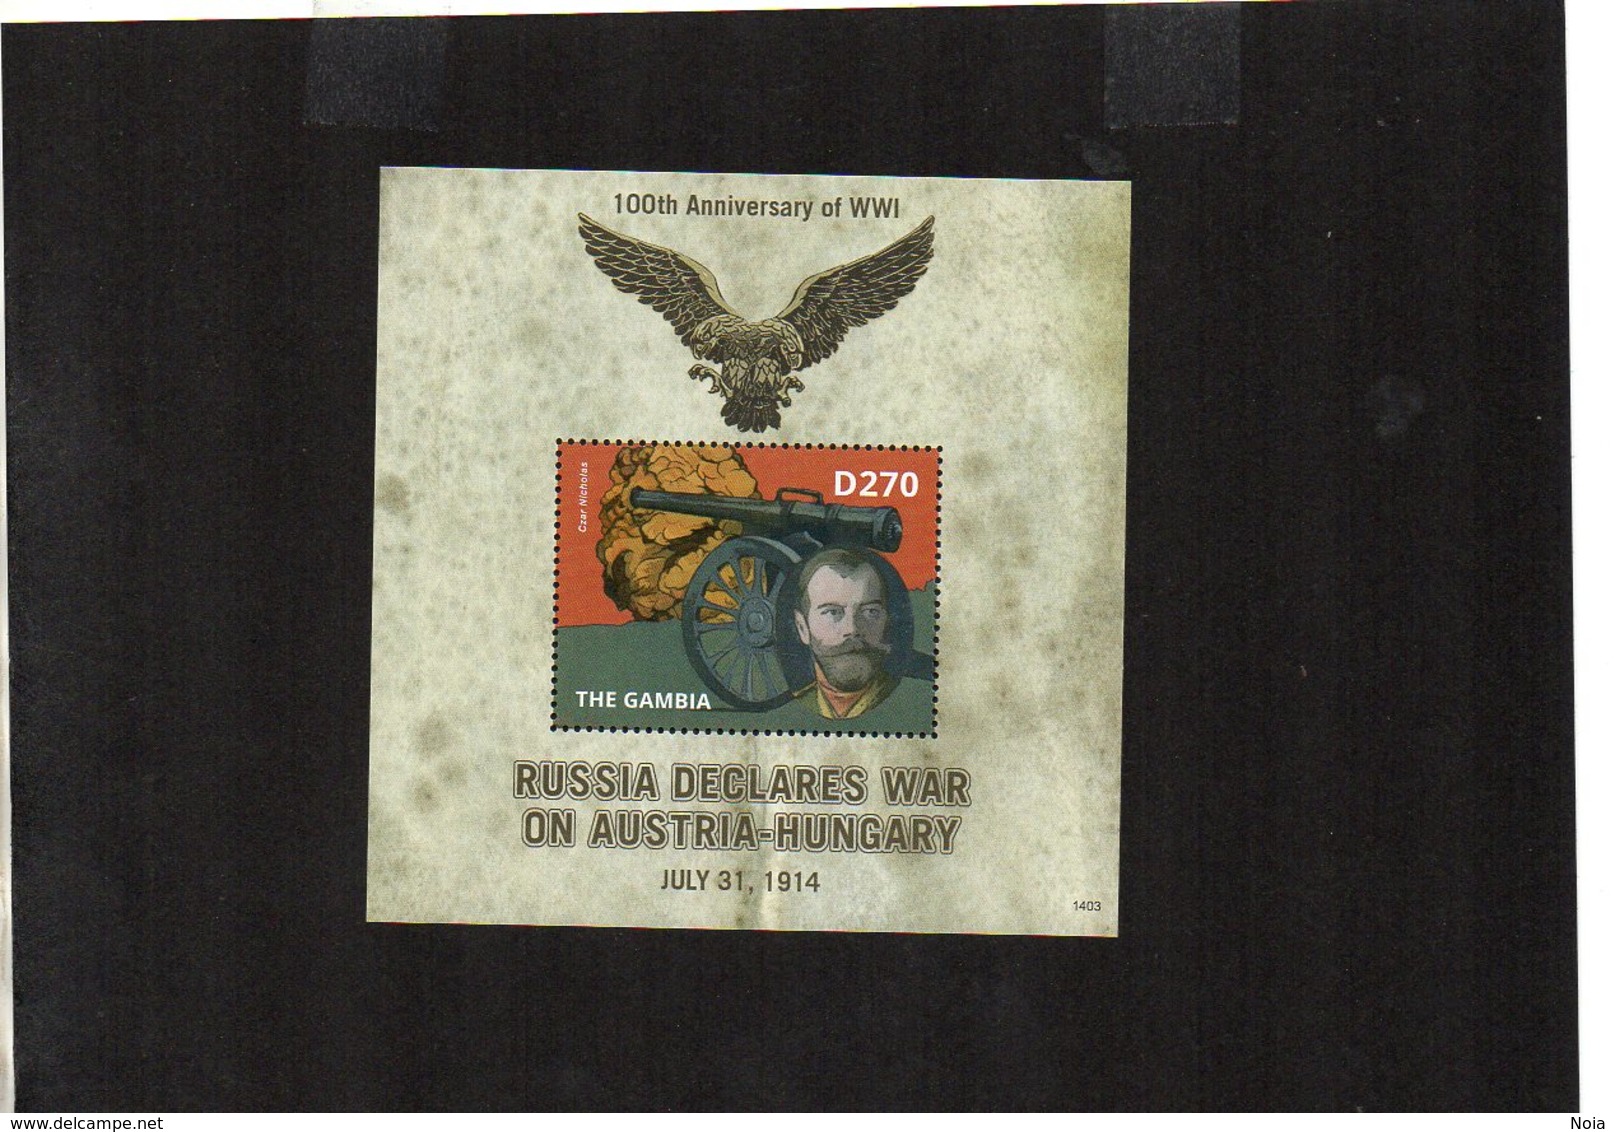 GAMBIA. MILITARY HISTORY. WWI. MNH (4R3109) - WW1